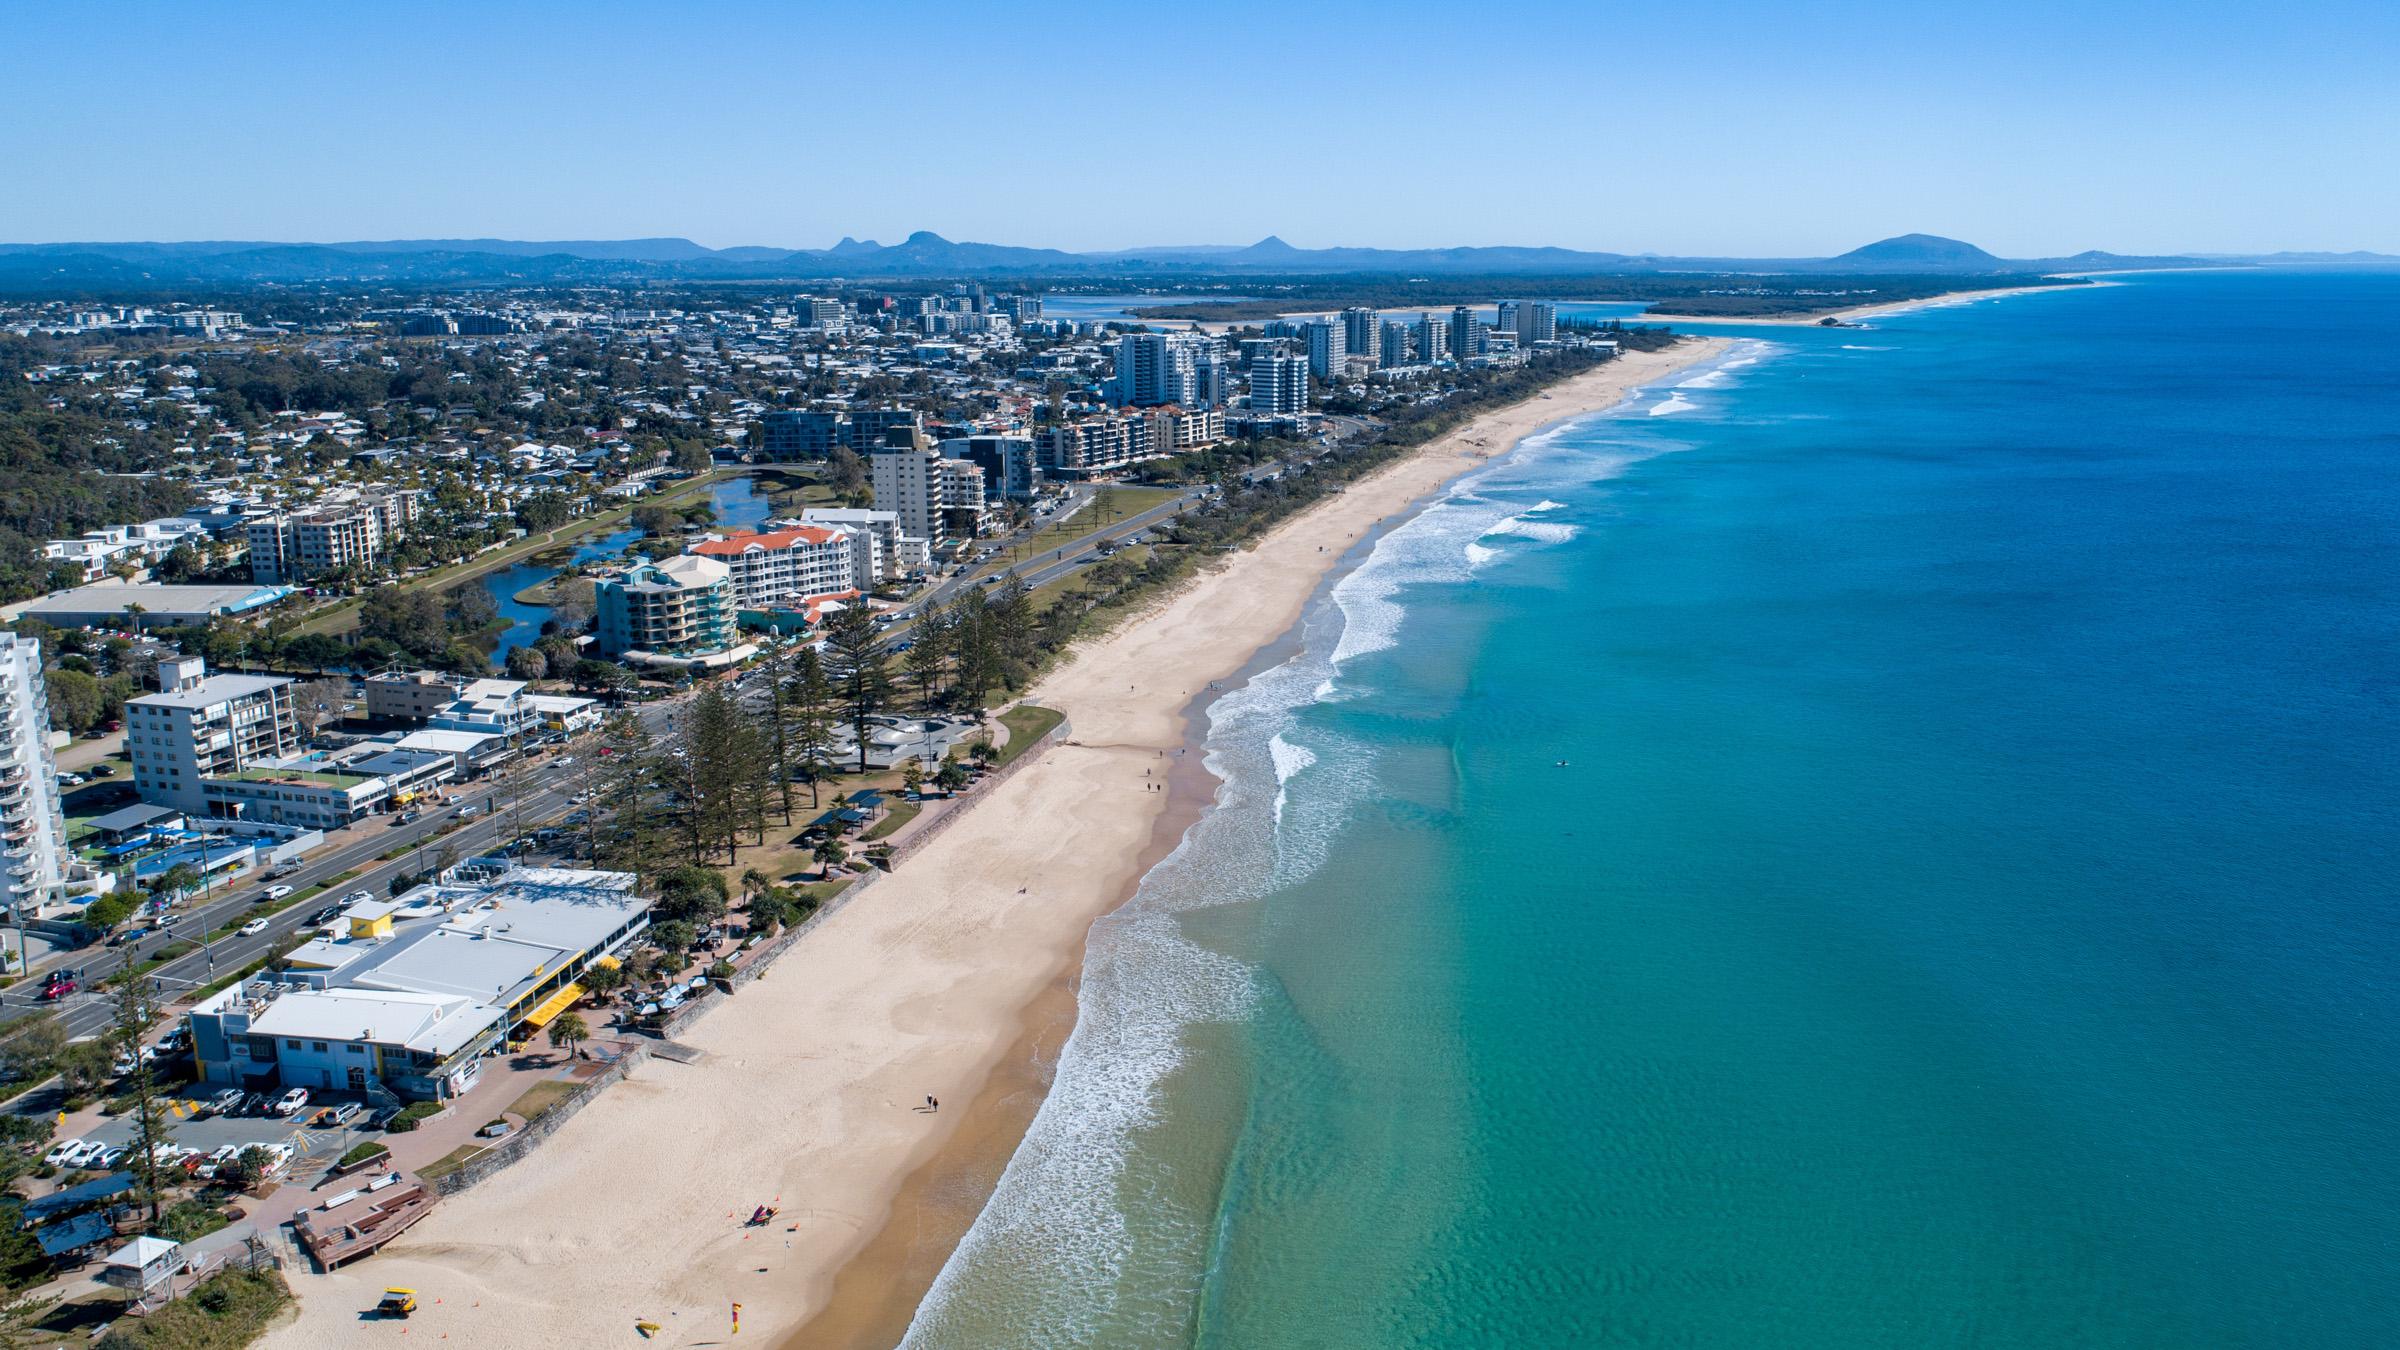 Aerial shot of Alexandra Coast Headland on a sunny day, with hotels, mountain ranges and surf lifesavers along the beach